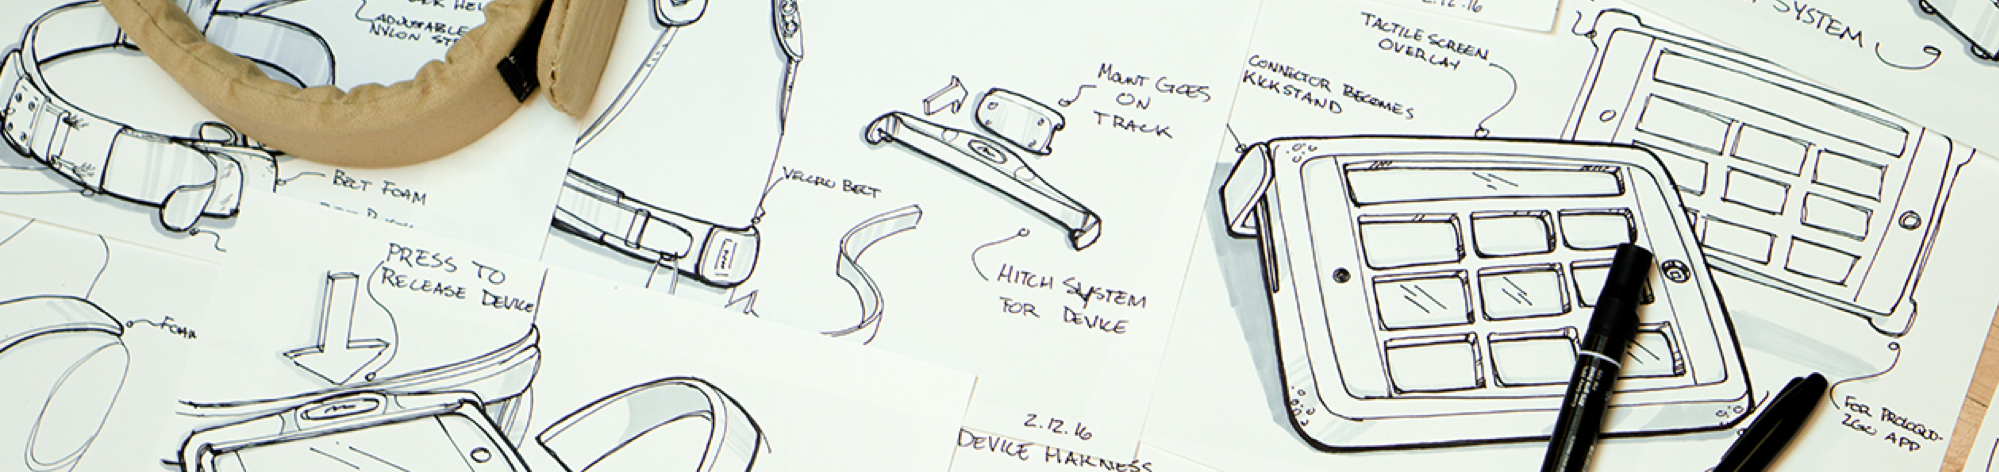 A banner image with sketches on paper